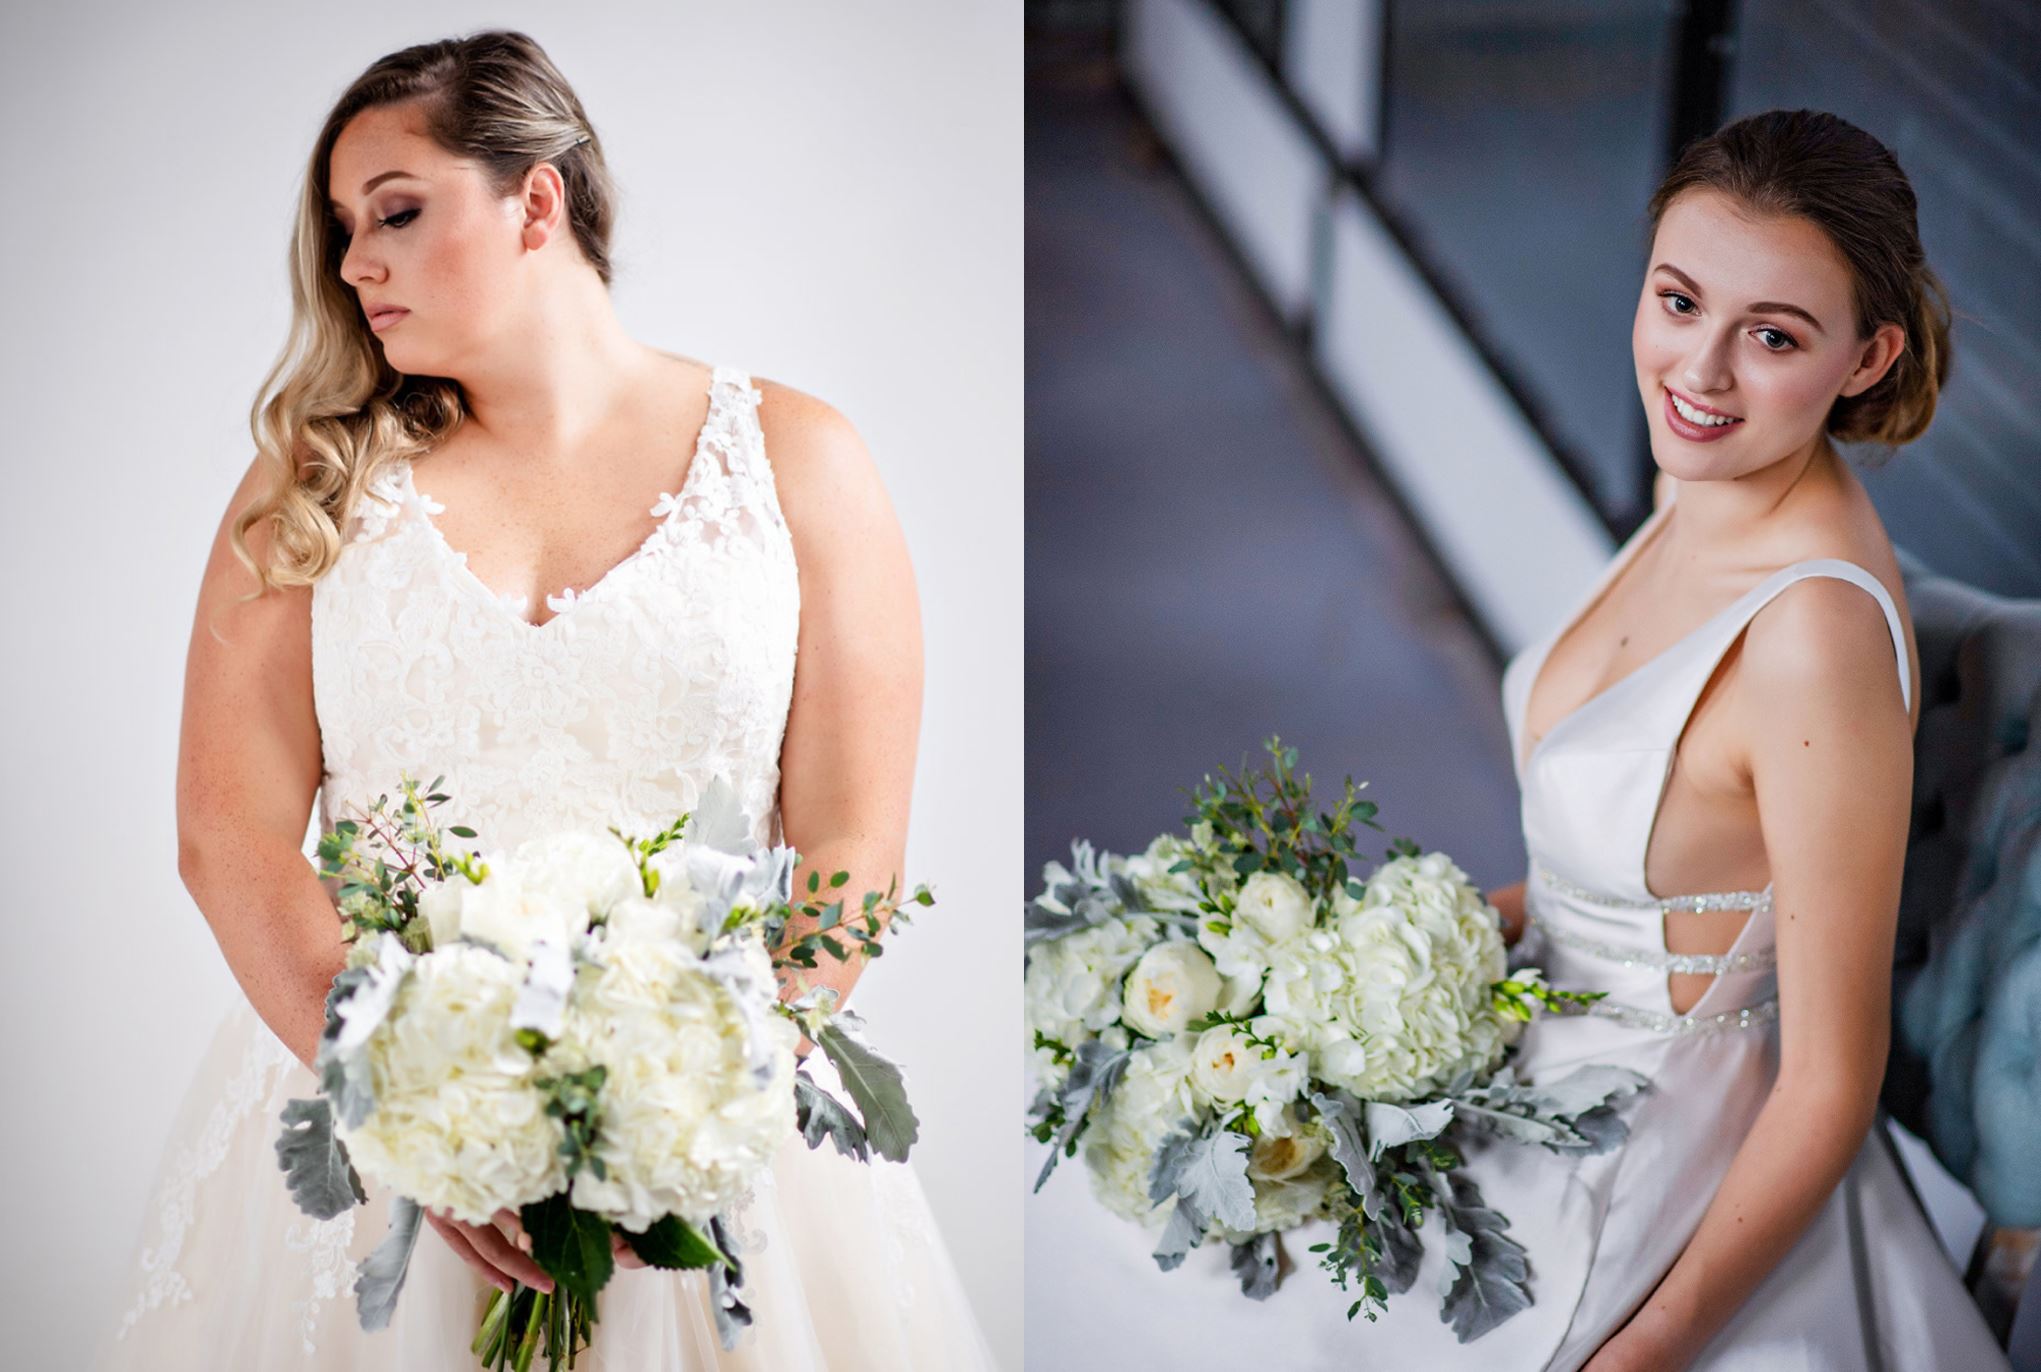 brides with bouquets in off the rack wedding dresses from here and now bridal in virginia beach